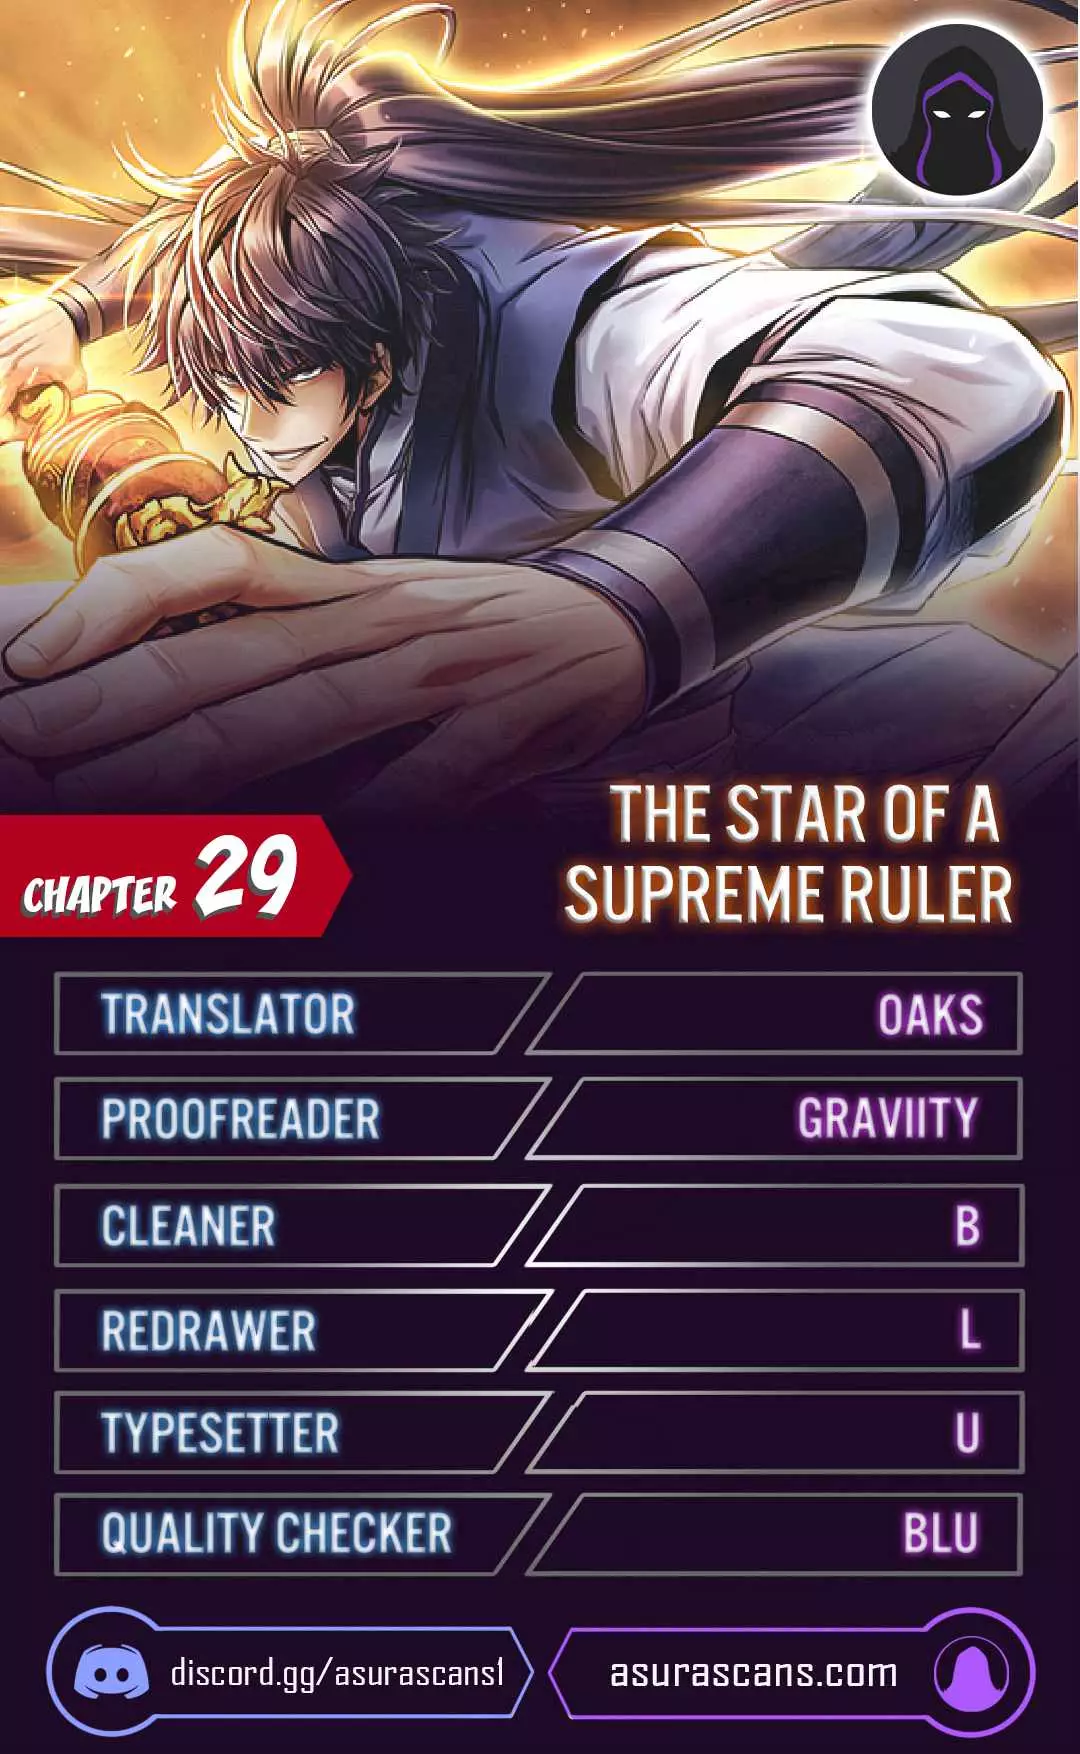 The Star Of A Supreme Ruler - 29 page 1-08643ea0